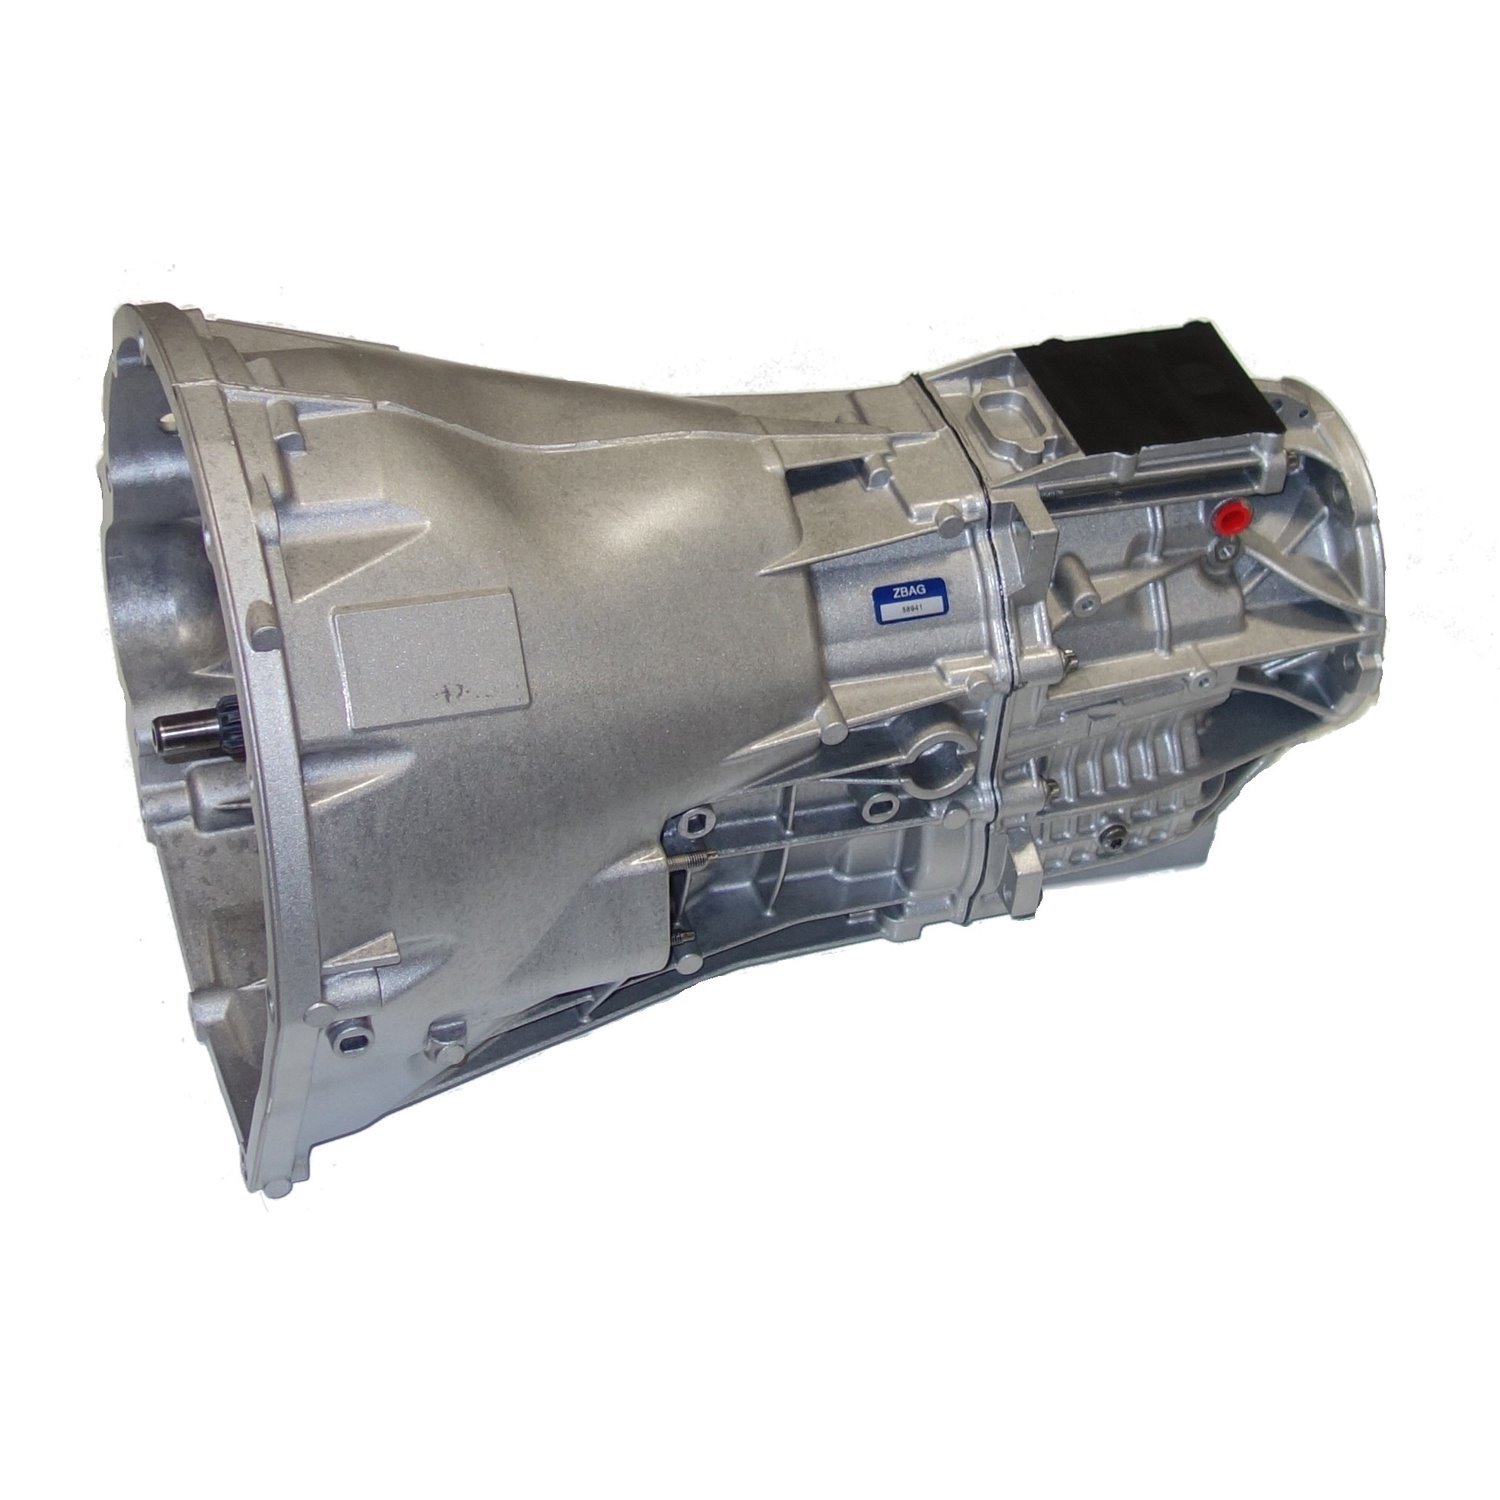 Remanufactured NSG370 Manual Transmission for Jeep 2005 Liberty